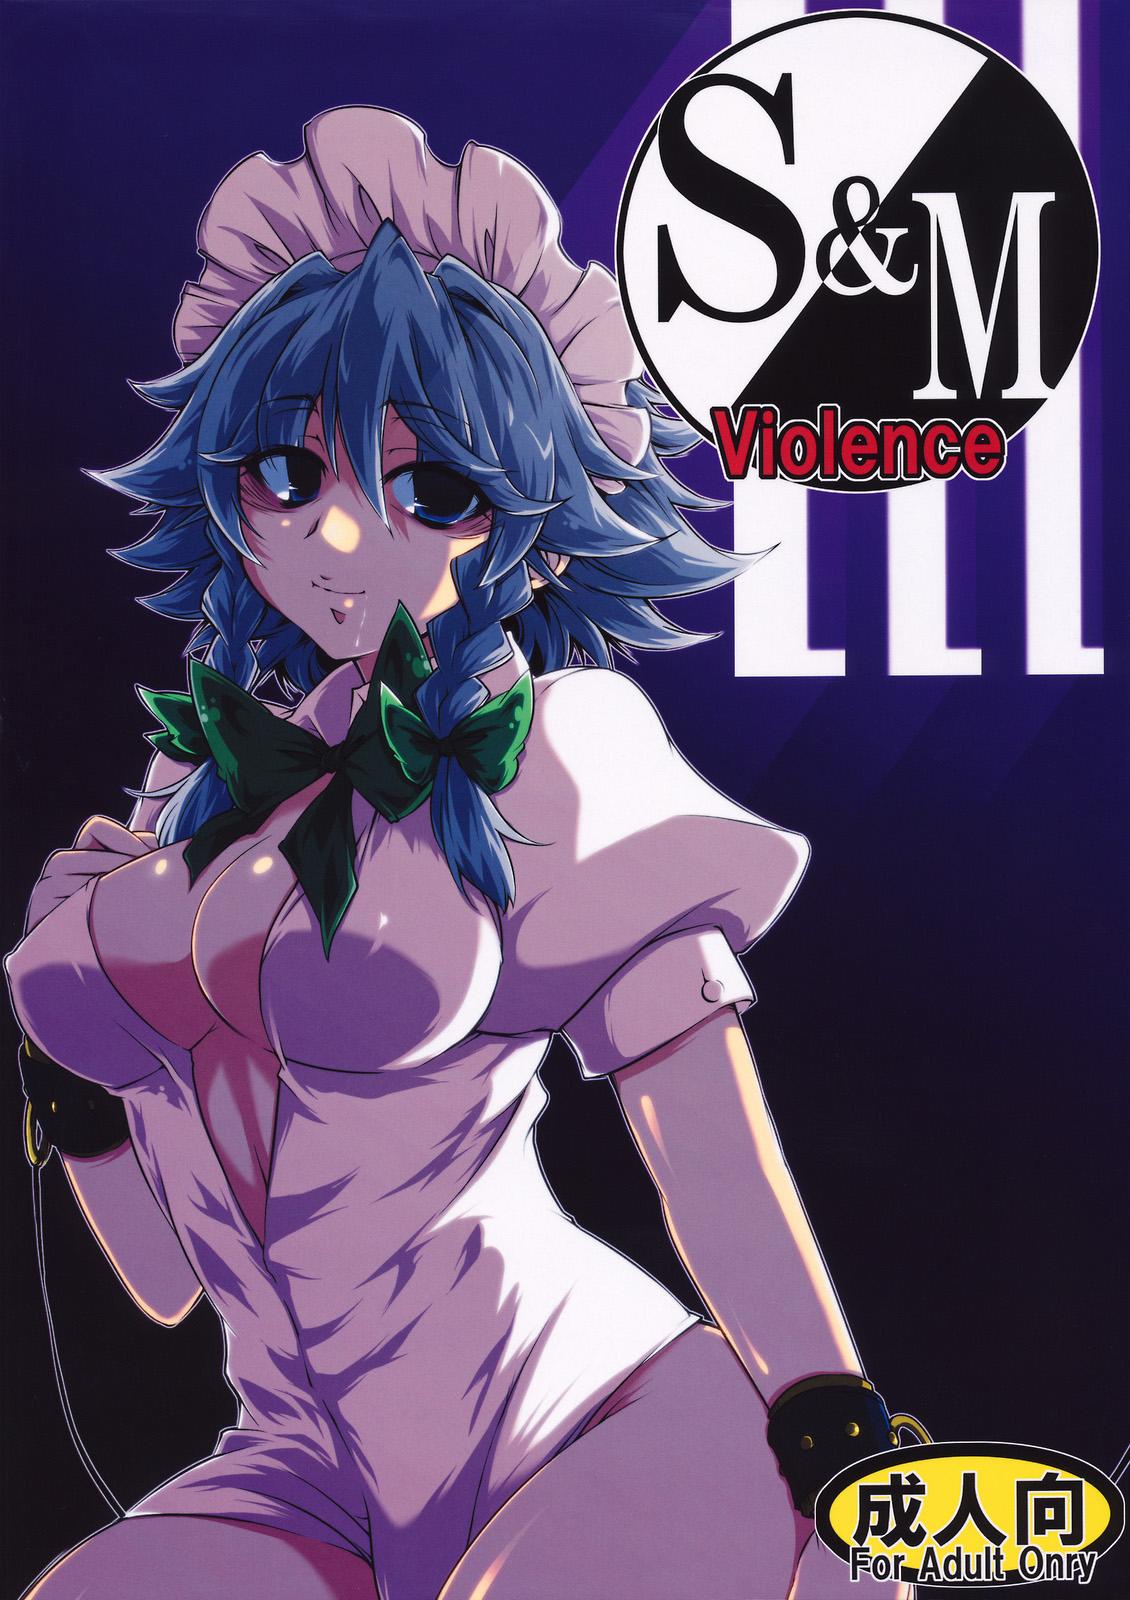 Spain S&M Violence - Touhou project Animated - Picture 1